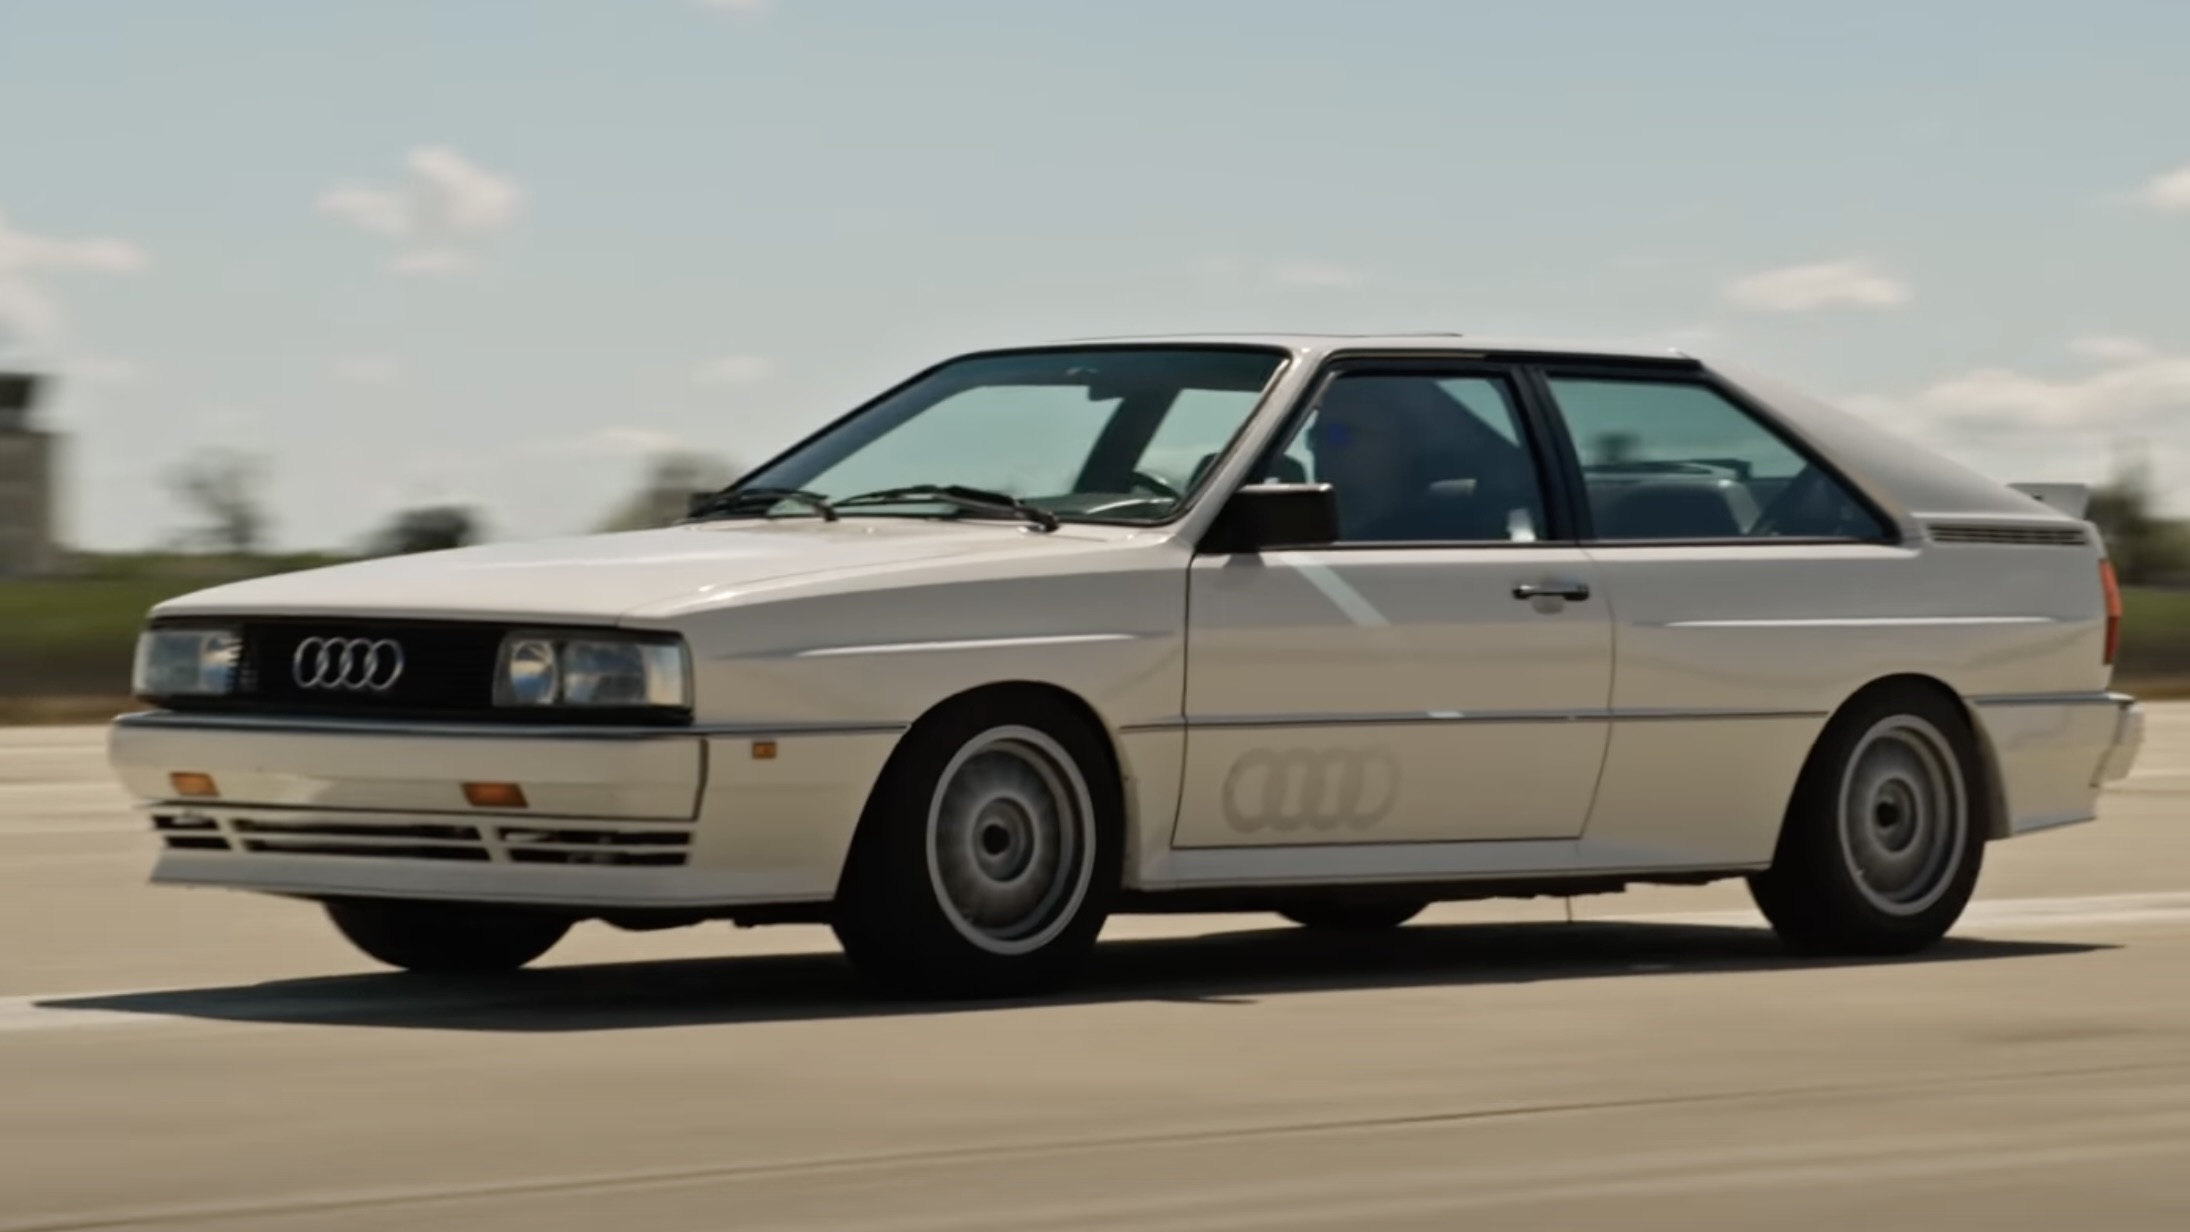 How Ferdinand Piëch Created the Iconic Audi Quattro and Saved the Brand